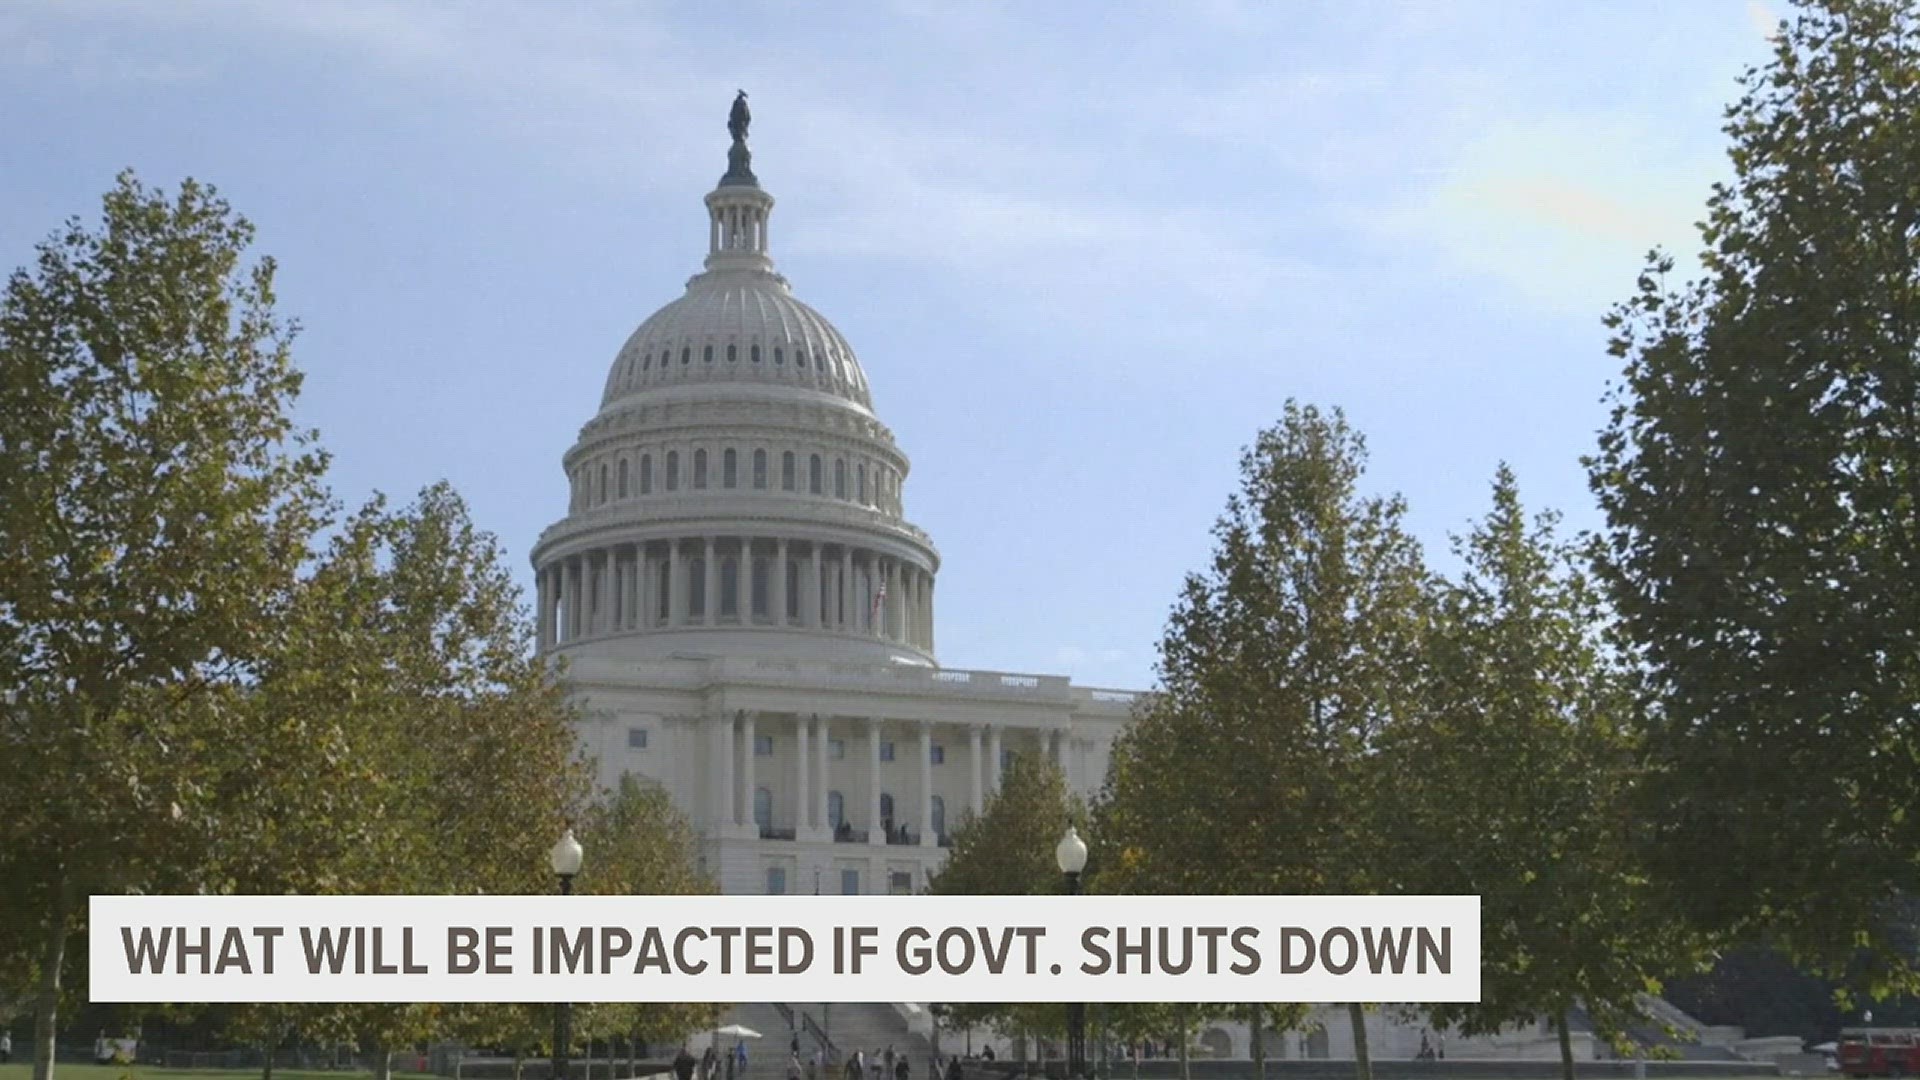 If Congress fails to pass Govt. funding legislation by the end of September, the Government will shutdown.